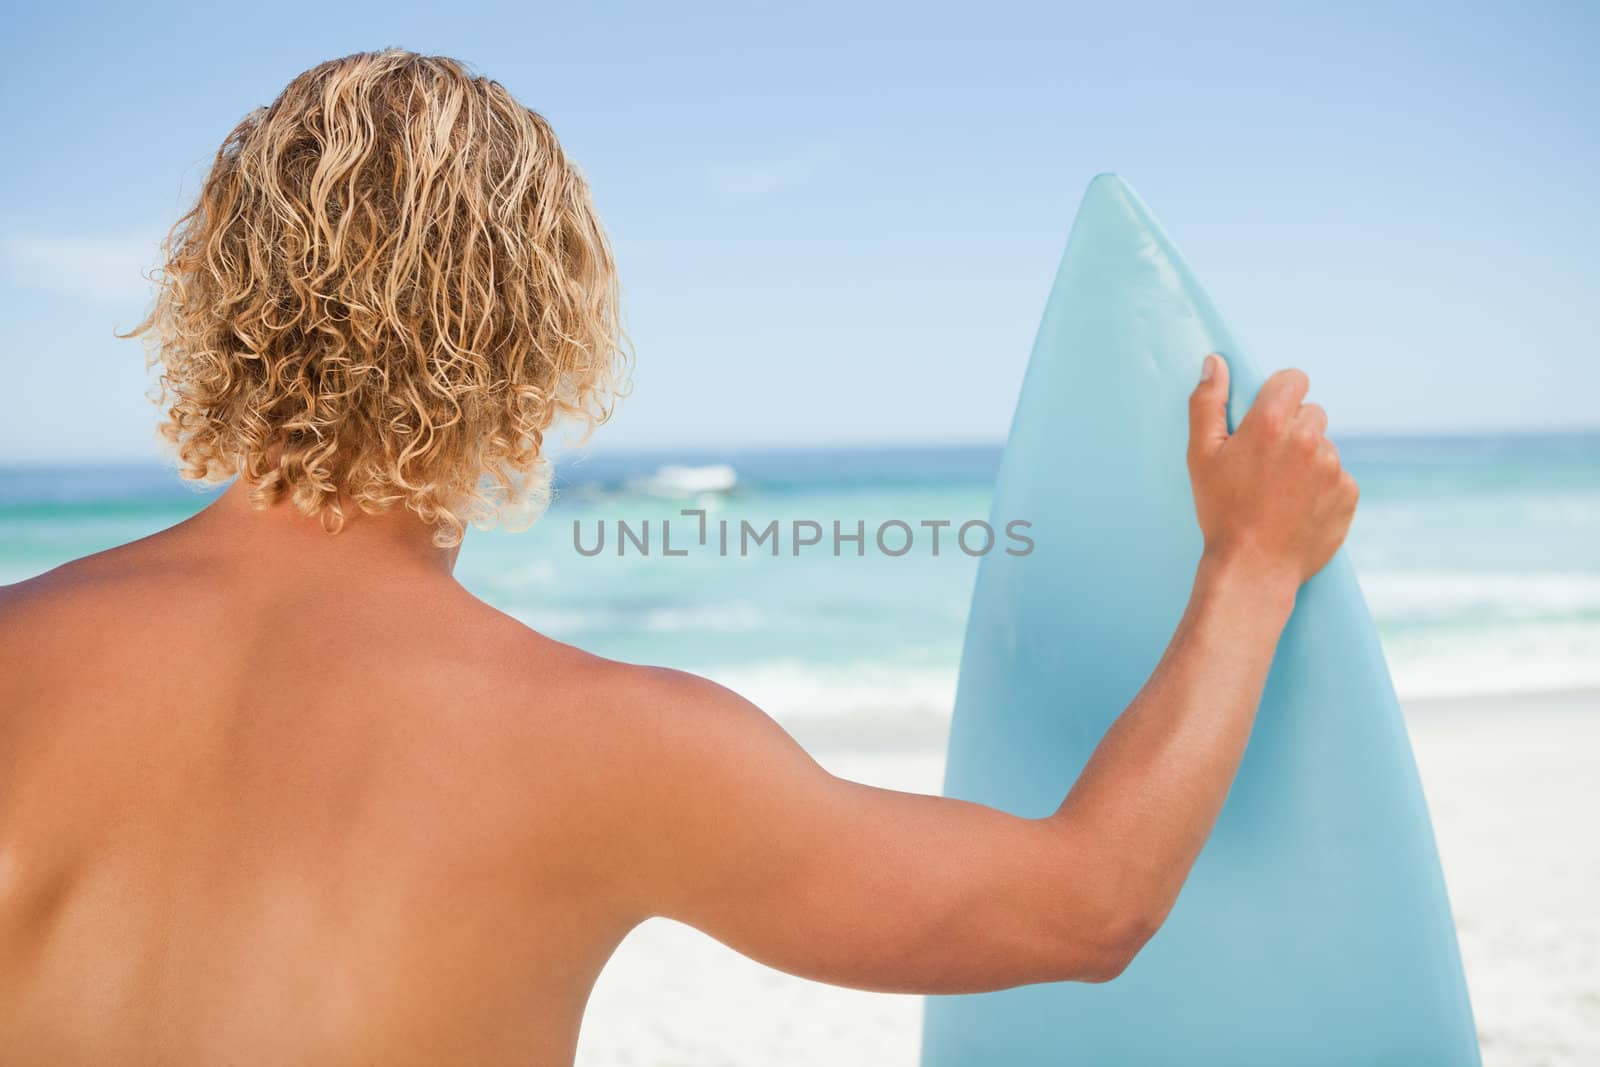 A young blonde man holding a perched surfboard while standing on the beach